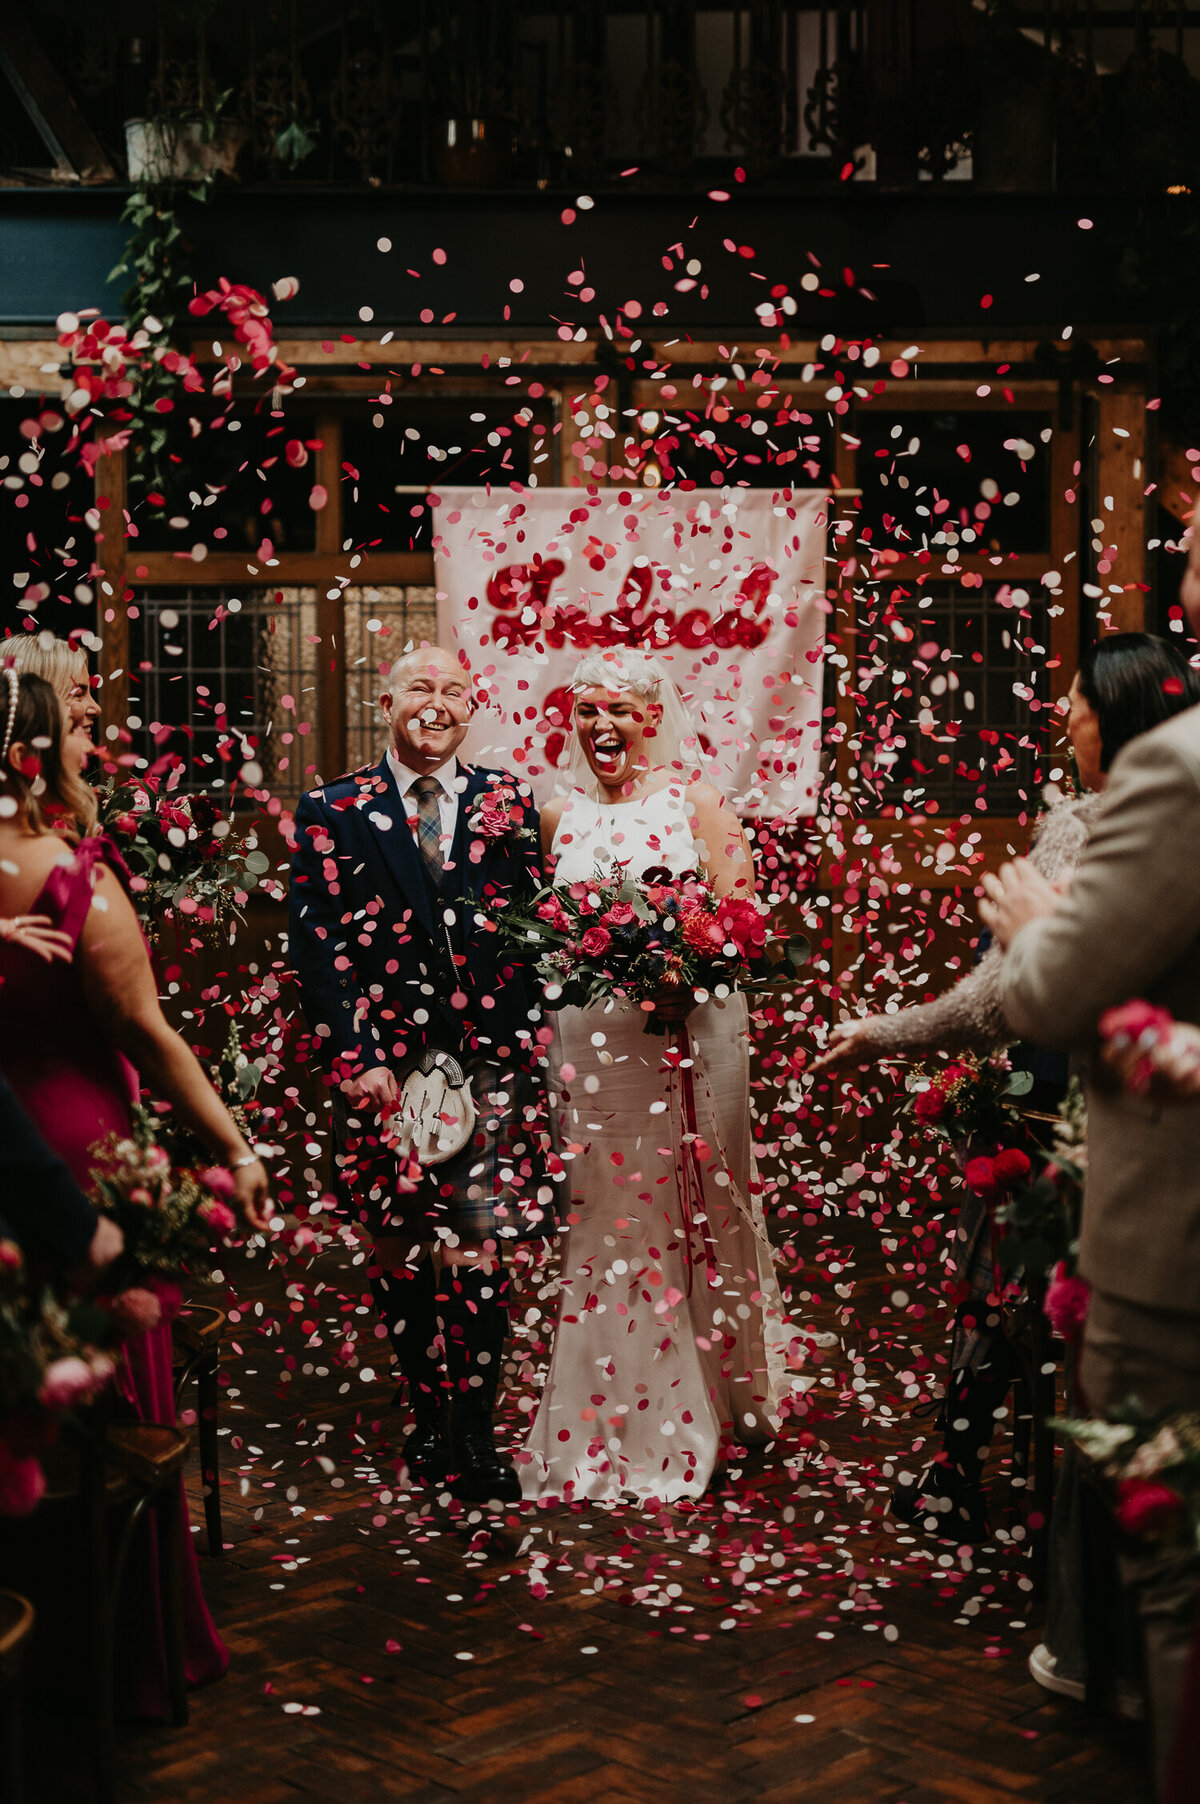 Pink and Red confetti flies around the room at Clapton Country Club